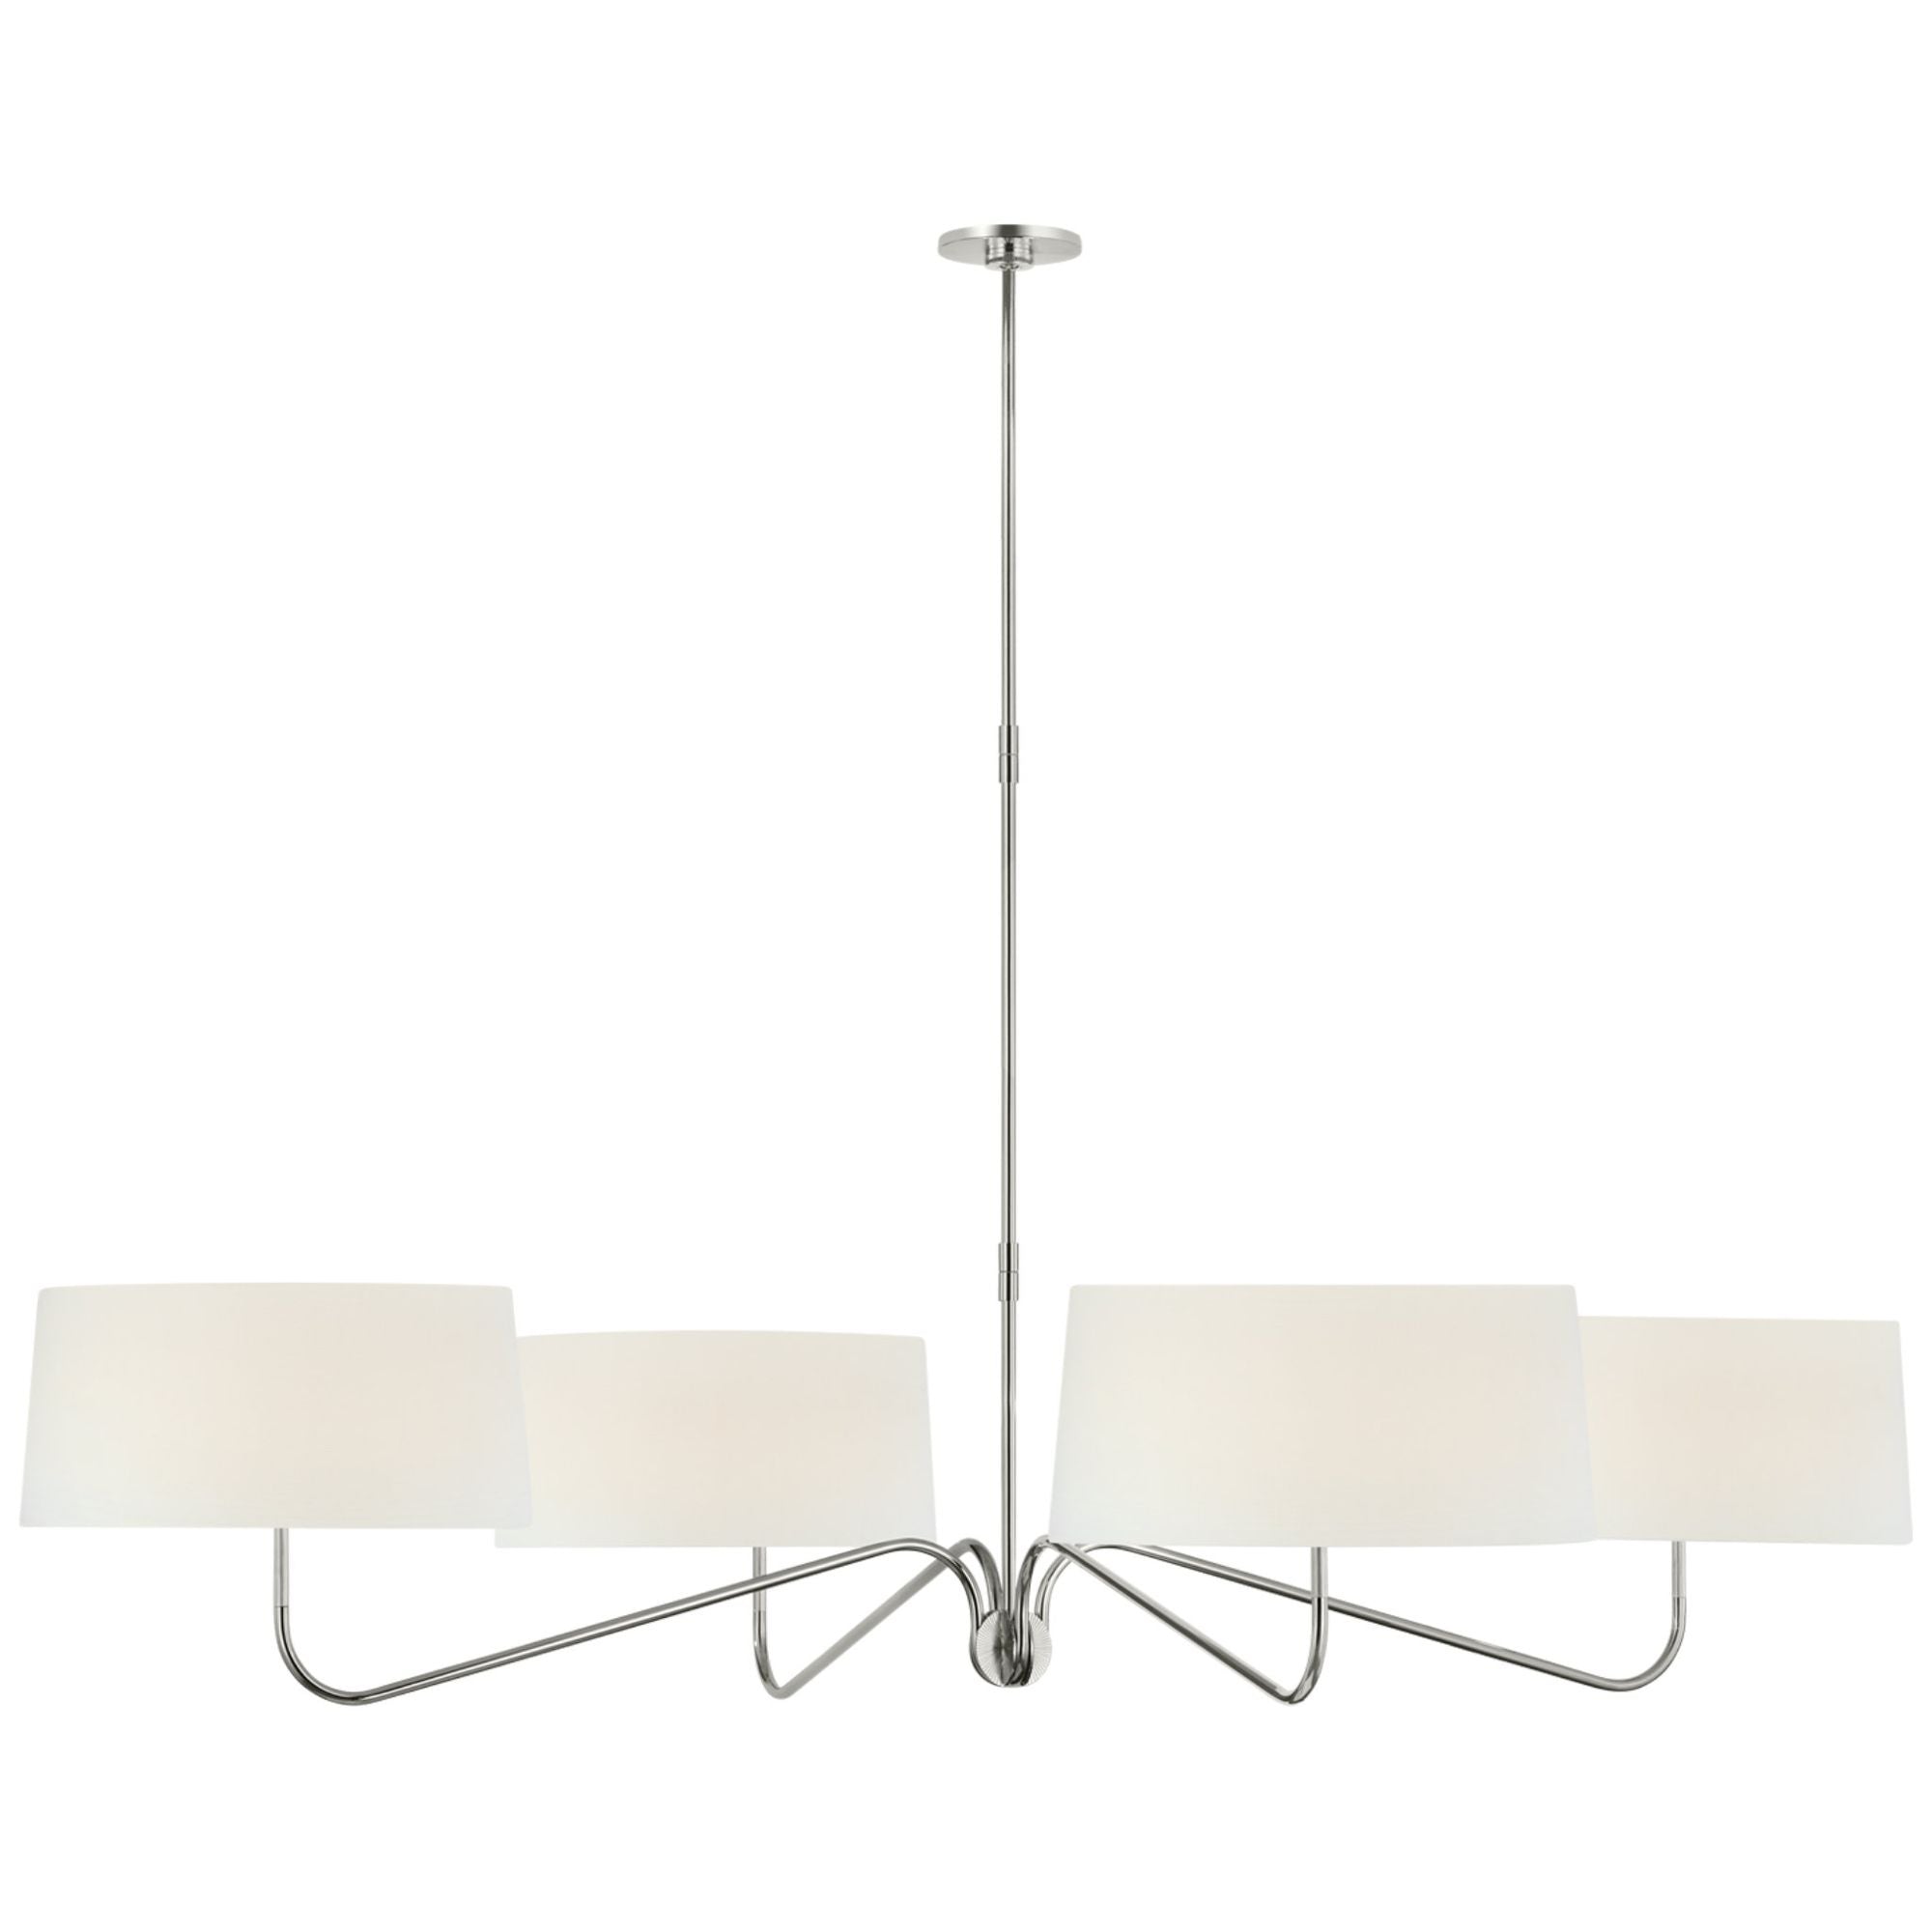 Thomas O'Brien Canto Grande Four Arm Chandelier in Polished Nickel with Linen Shades